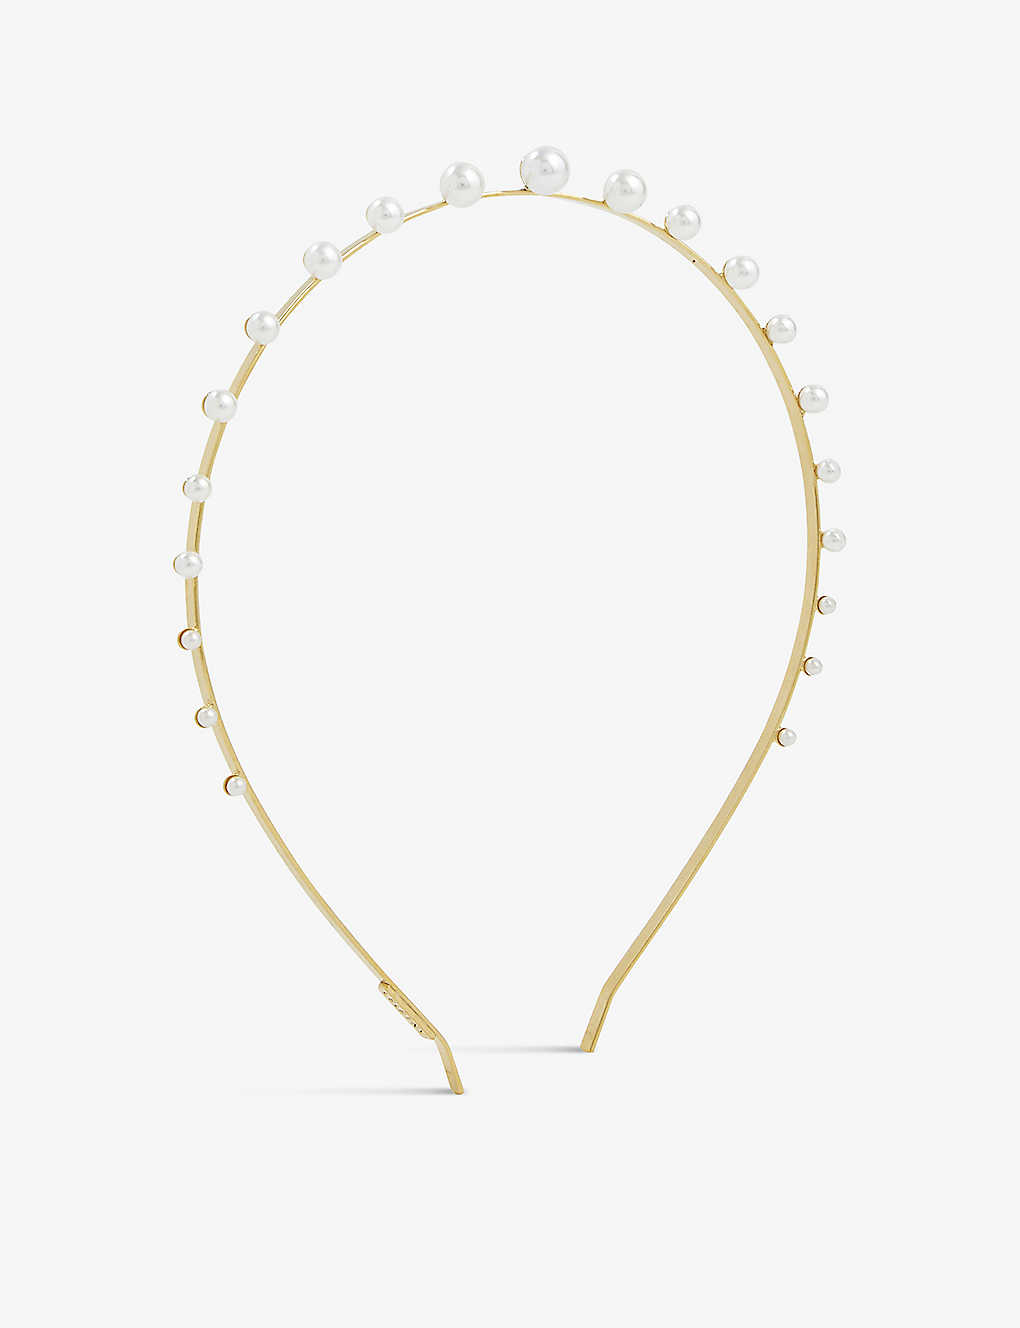 LELET NY BIRTHSTONE FAUX PEARL-EMBELLISHED STAINLESS STEEL HEADBAND,66573716